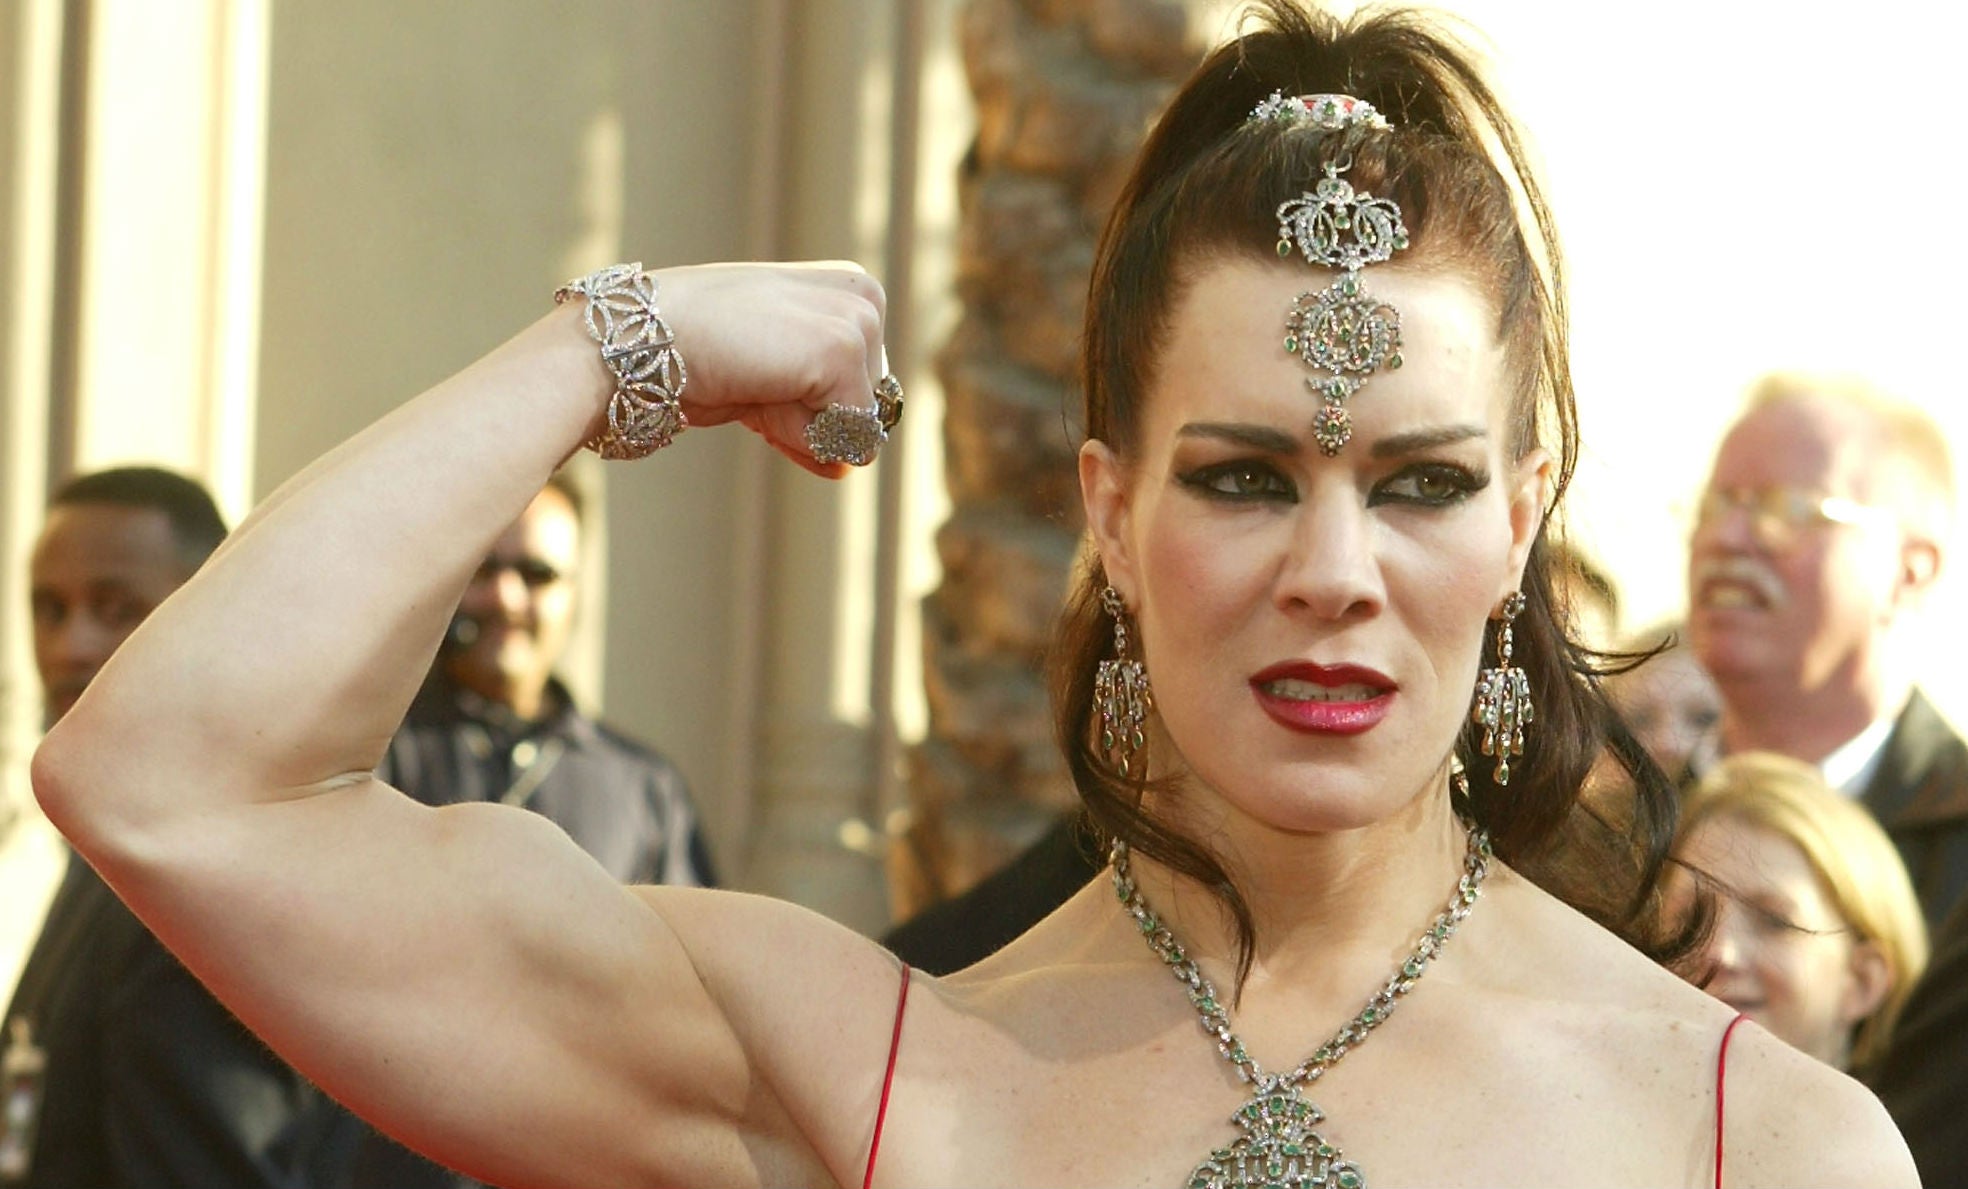 A wrestling pioneer, Chyna is undoubtedly one of the most famous and iconic female wrestlers in history